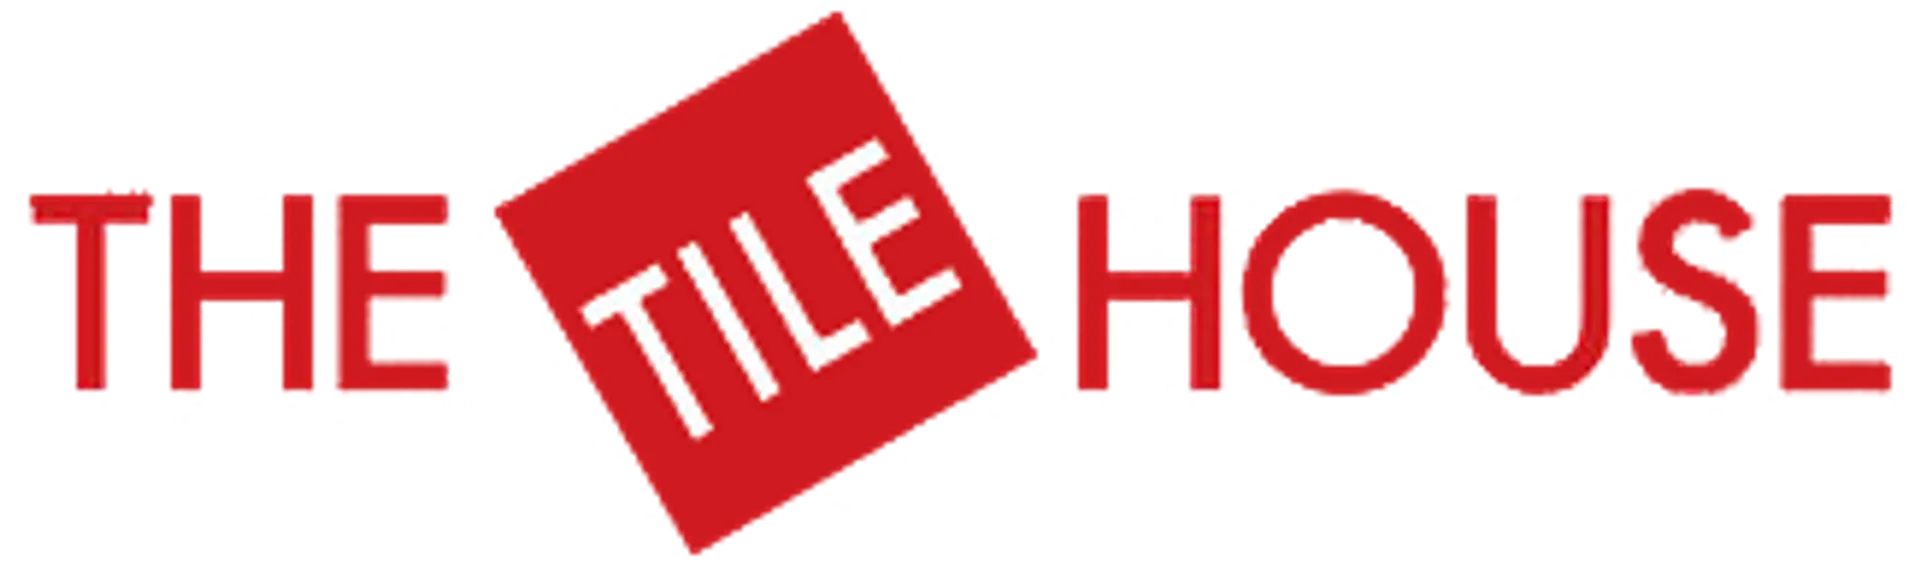 THE TILE HOUSE logo. Current catalogue